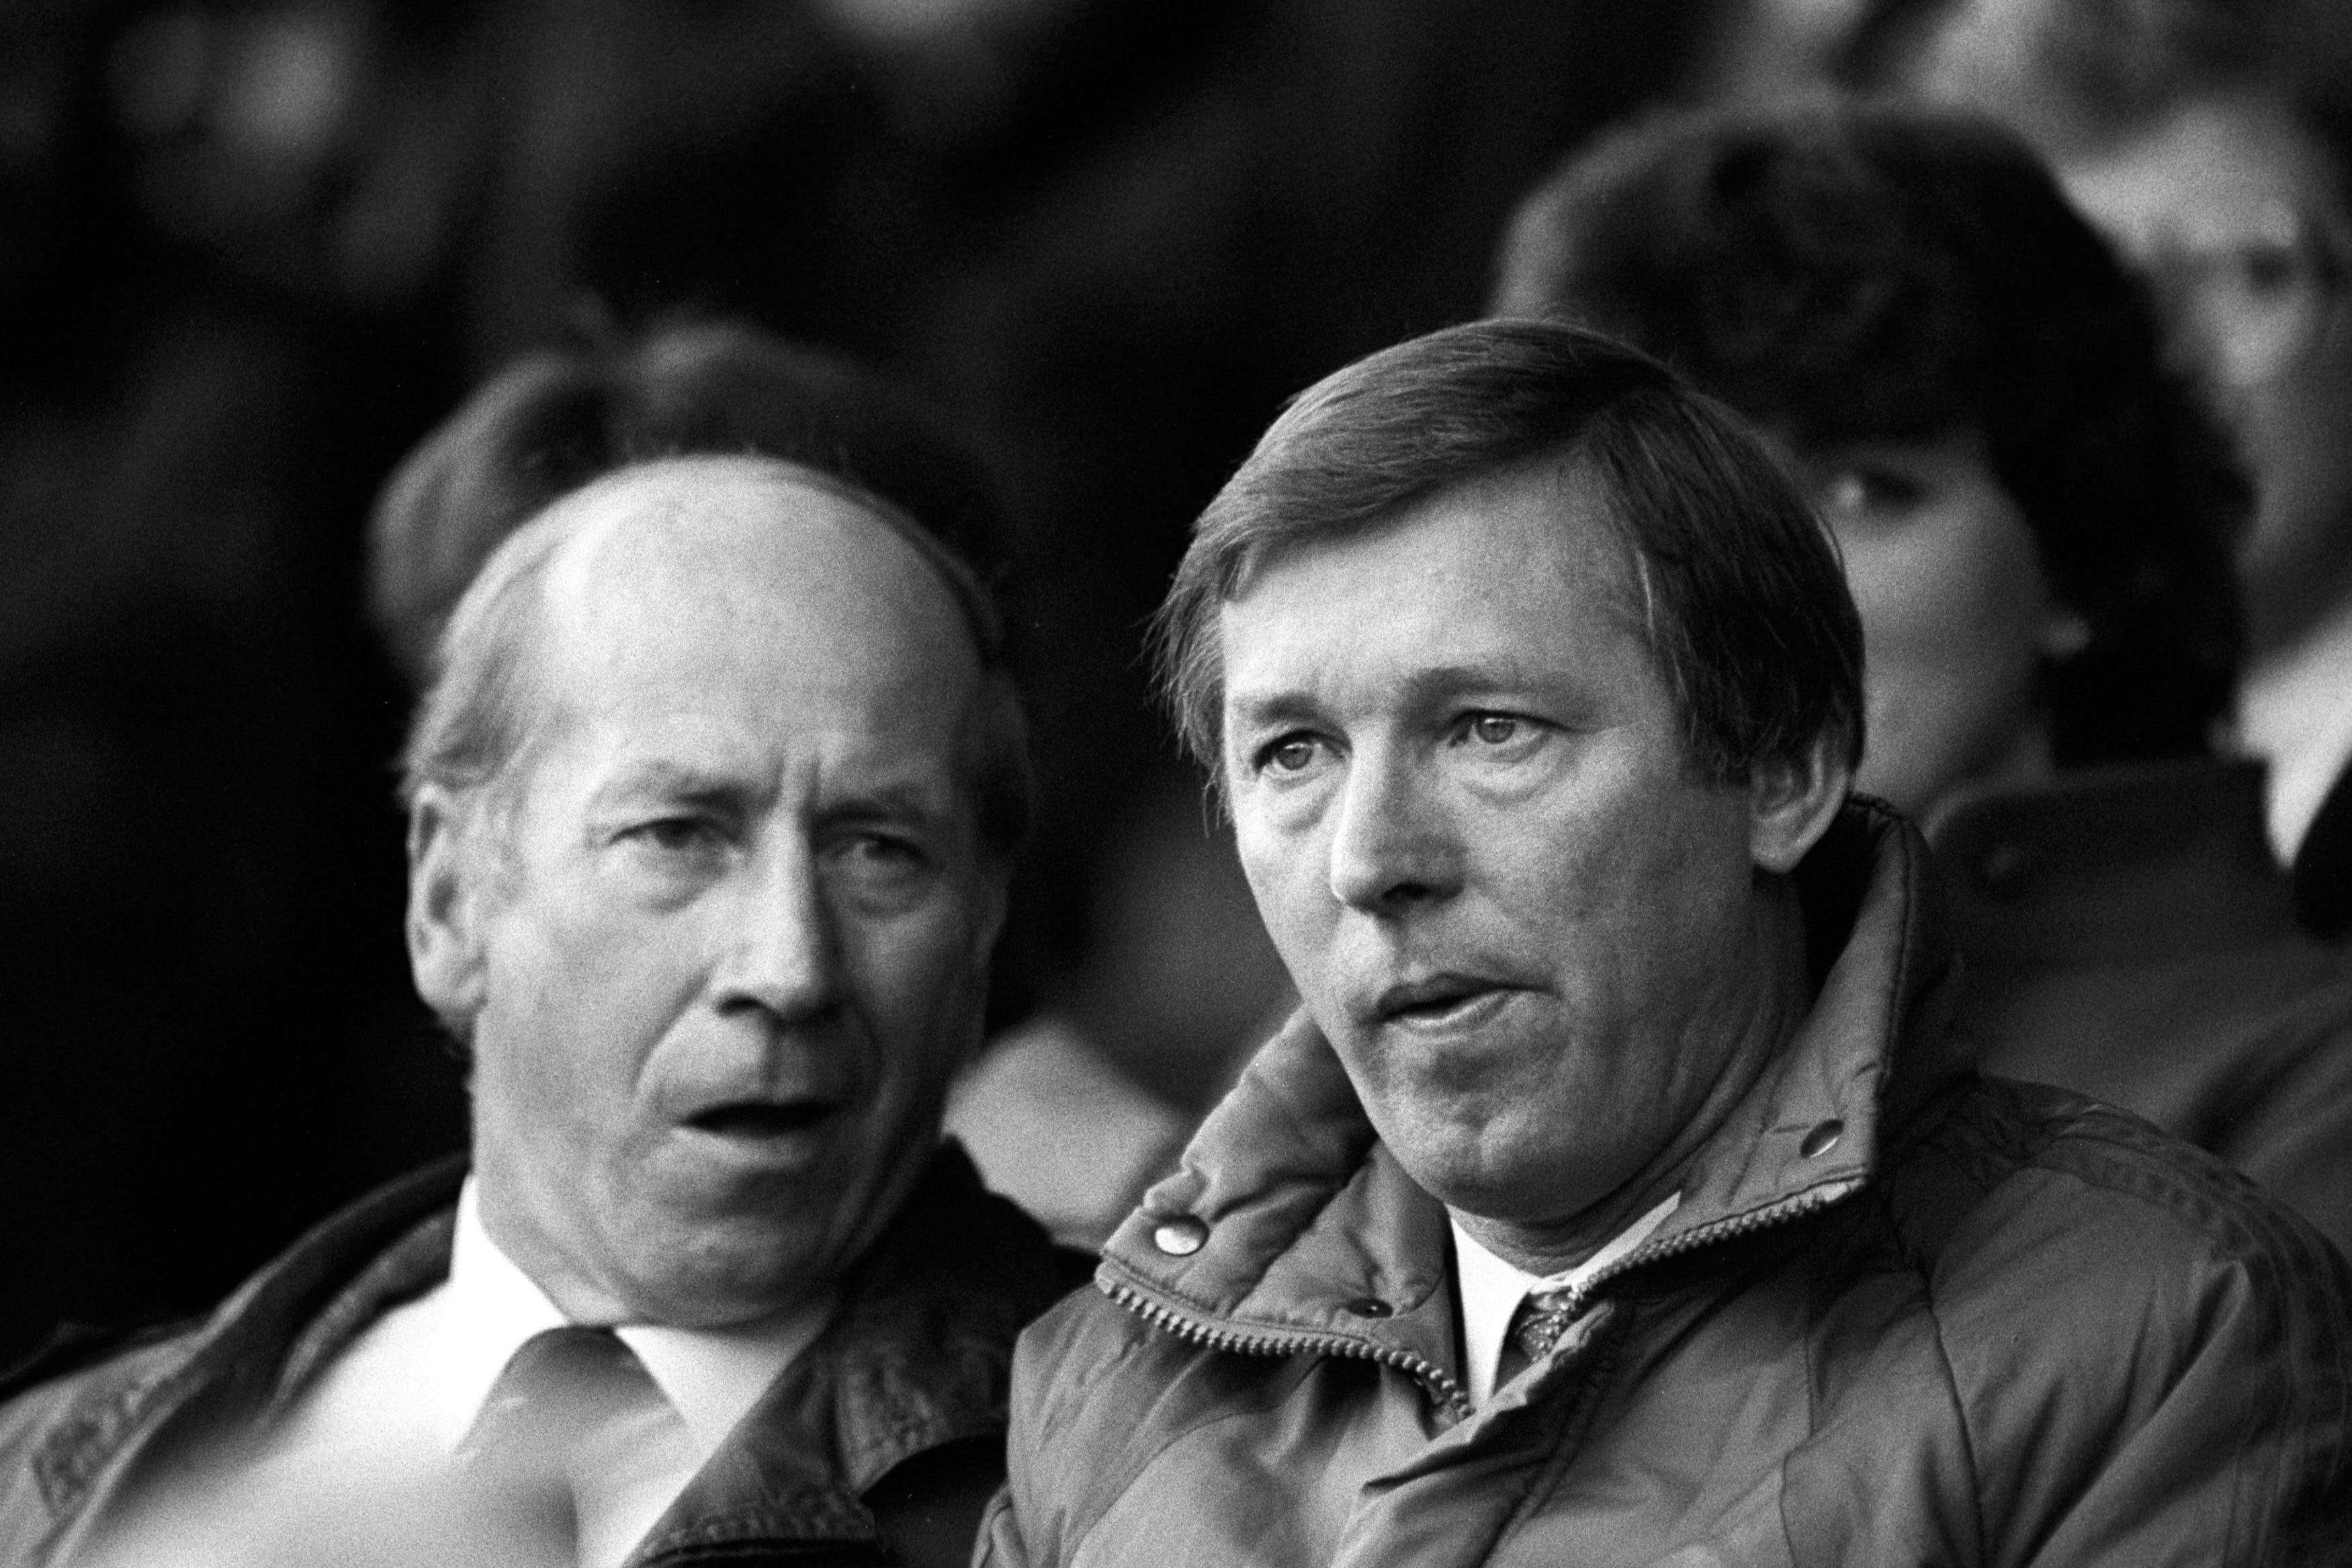 Sir Alex Ferguson (right) has described Sir Bobby Charlton (left) as a “tower of strength” (PA)